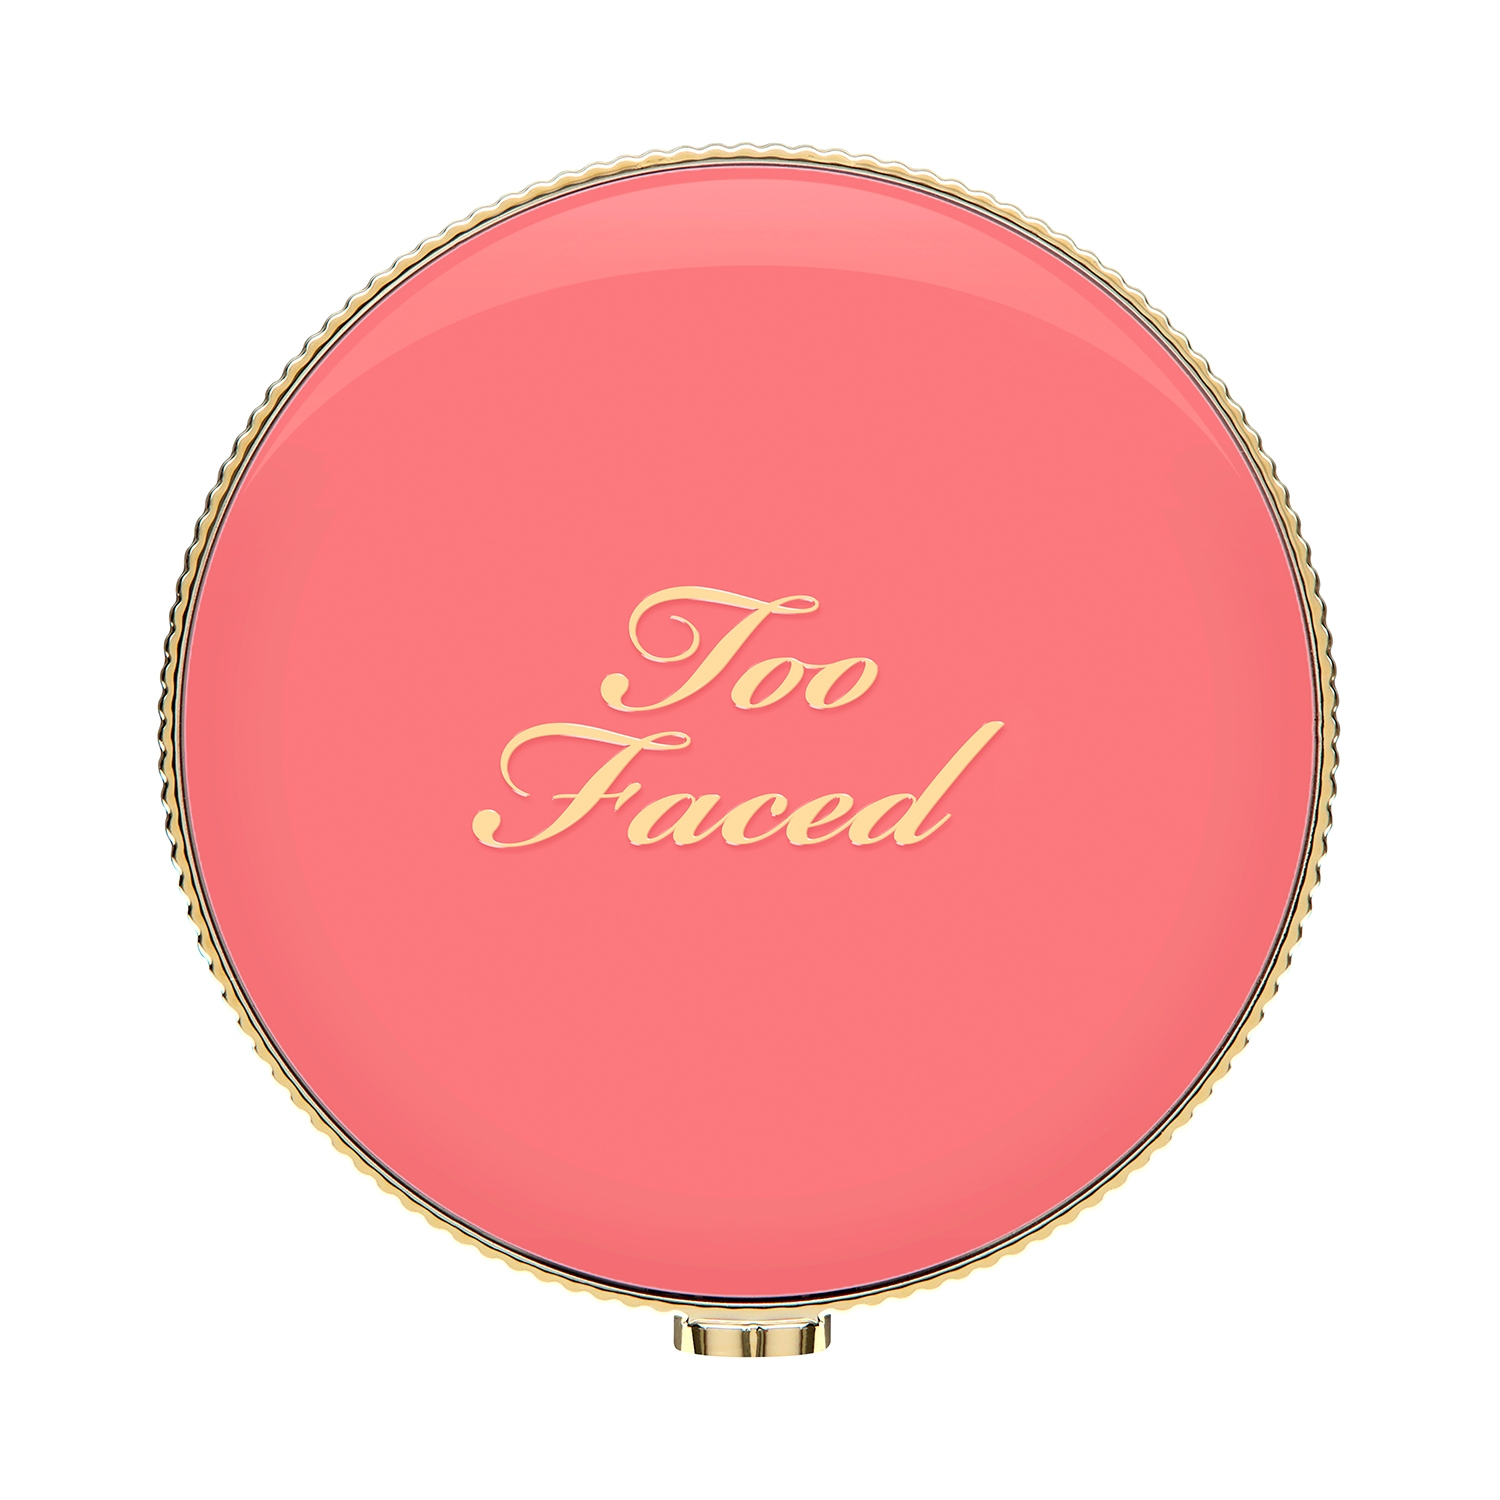 Too Faced | Too Faced Cloud Crush Blush - Golden Hour (4.8g)